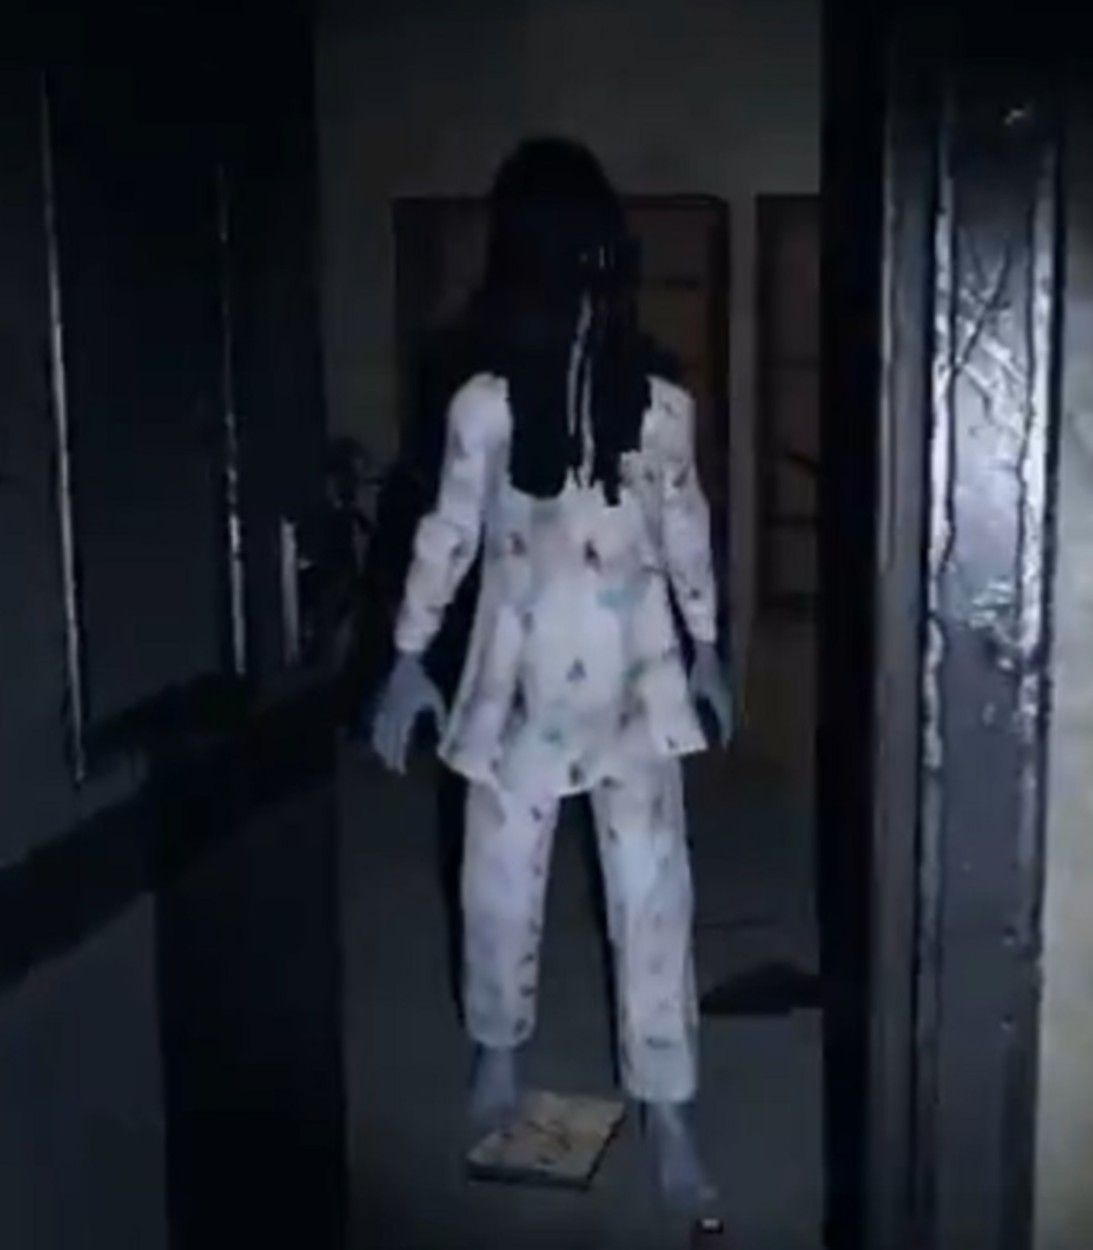 One of the new ghosts coming to Phasmophobia looks like Samara from The Ring